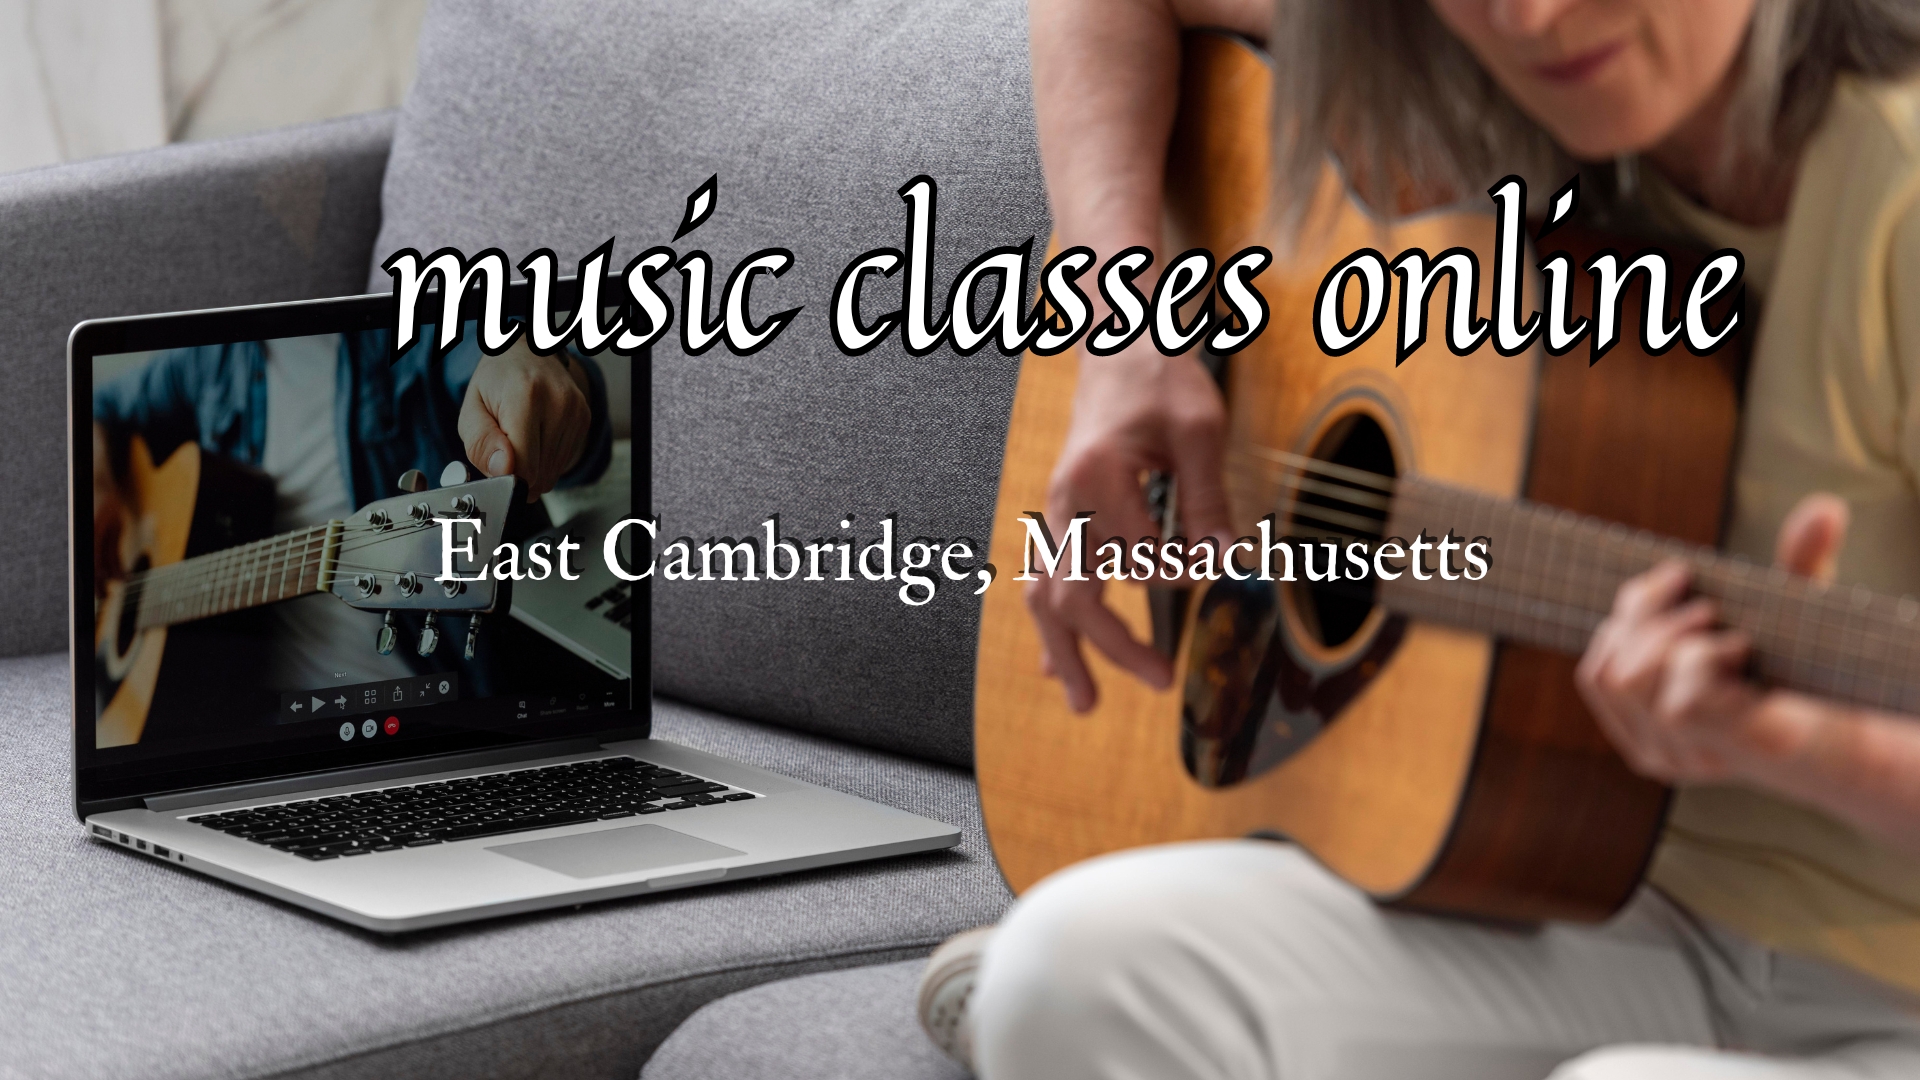 Welcome to East Cambridge: The Hub for Online Music Classes